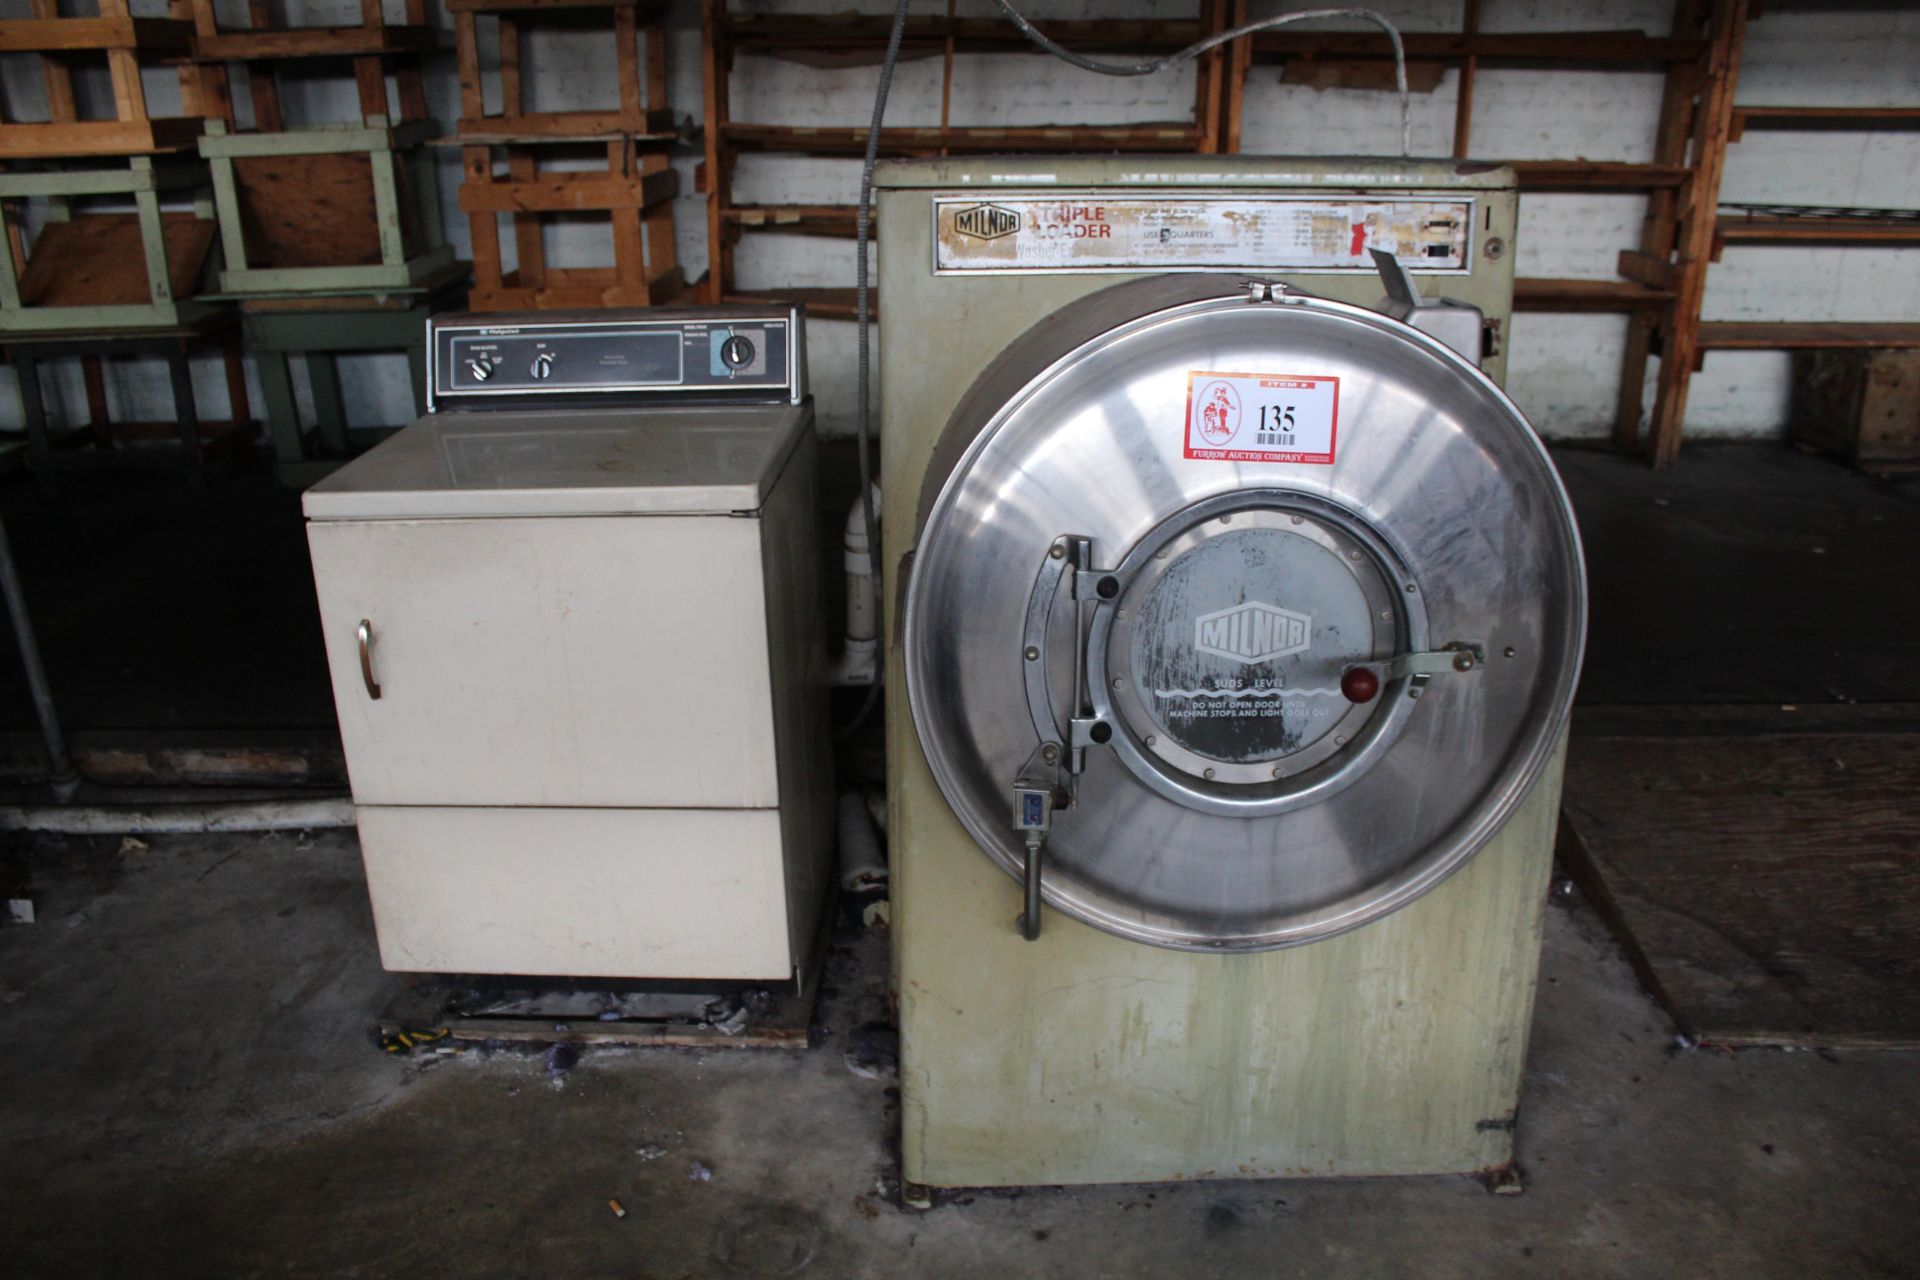 Milnor Triple Loader Automatic Dryer & a Hotpoint Dryer